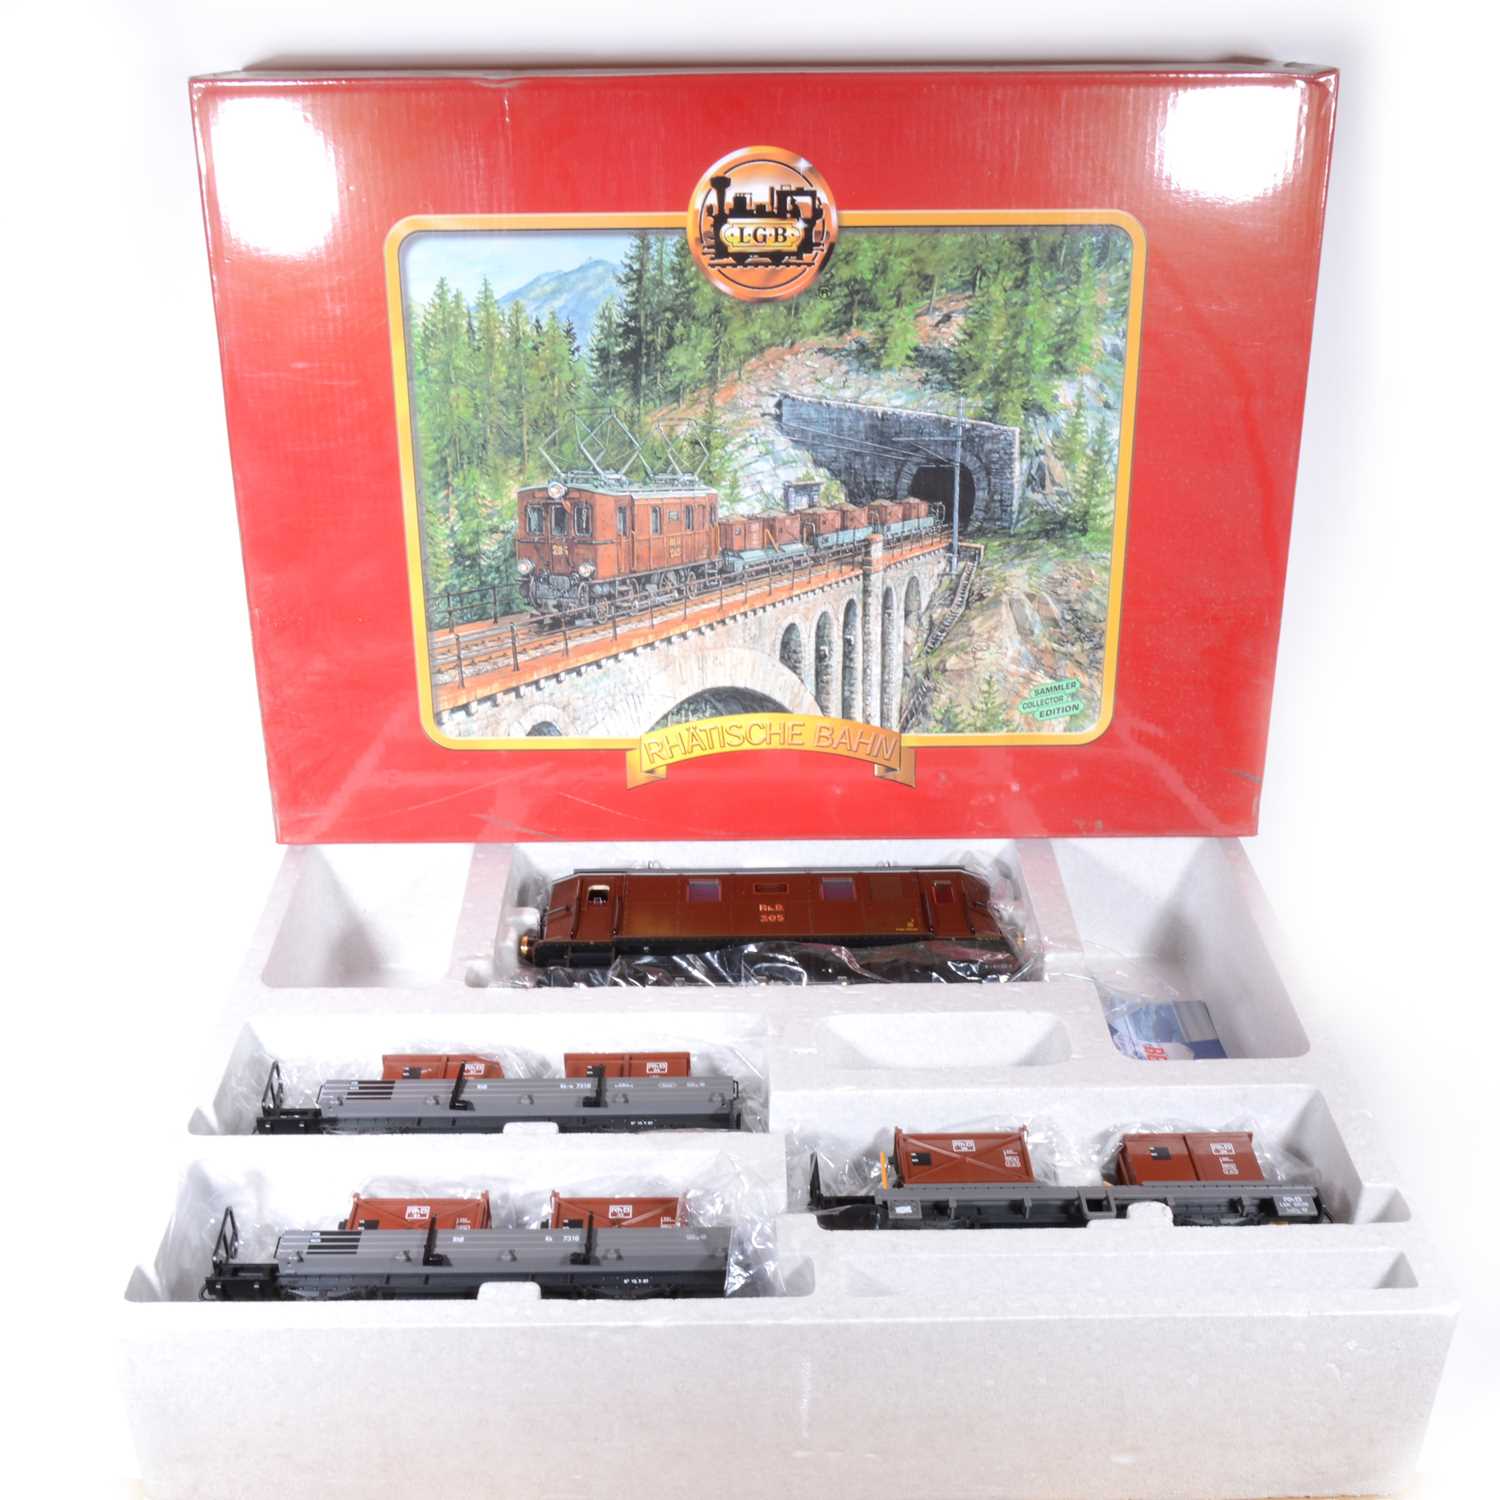 Lot 96 - LGB electric, G scale, RhB Schotter-Zug extra premium locomotive and rolling stock, no.29452, boxed.